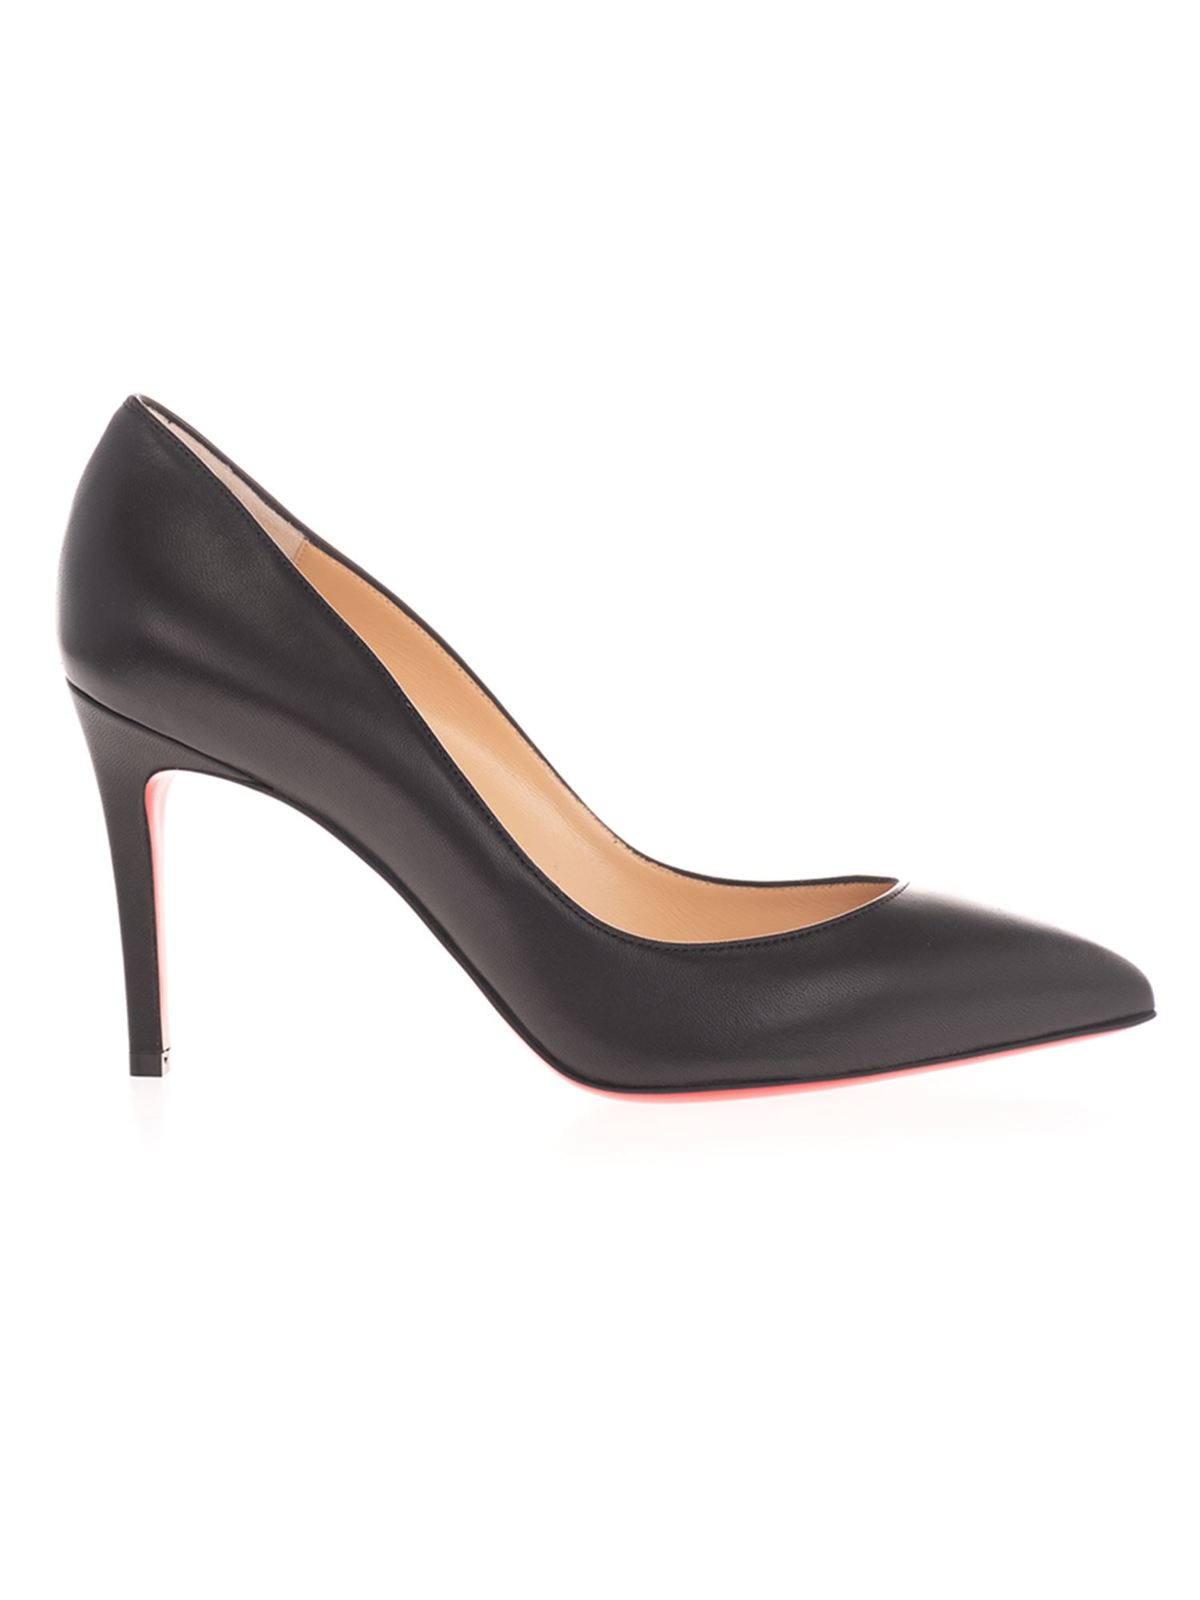 louboutin shoes pigalle